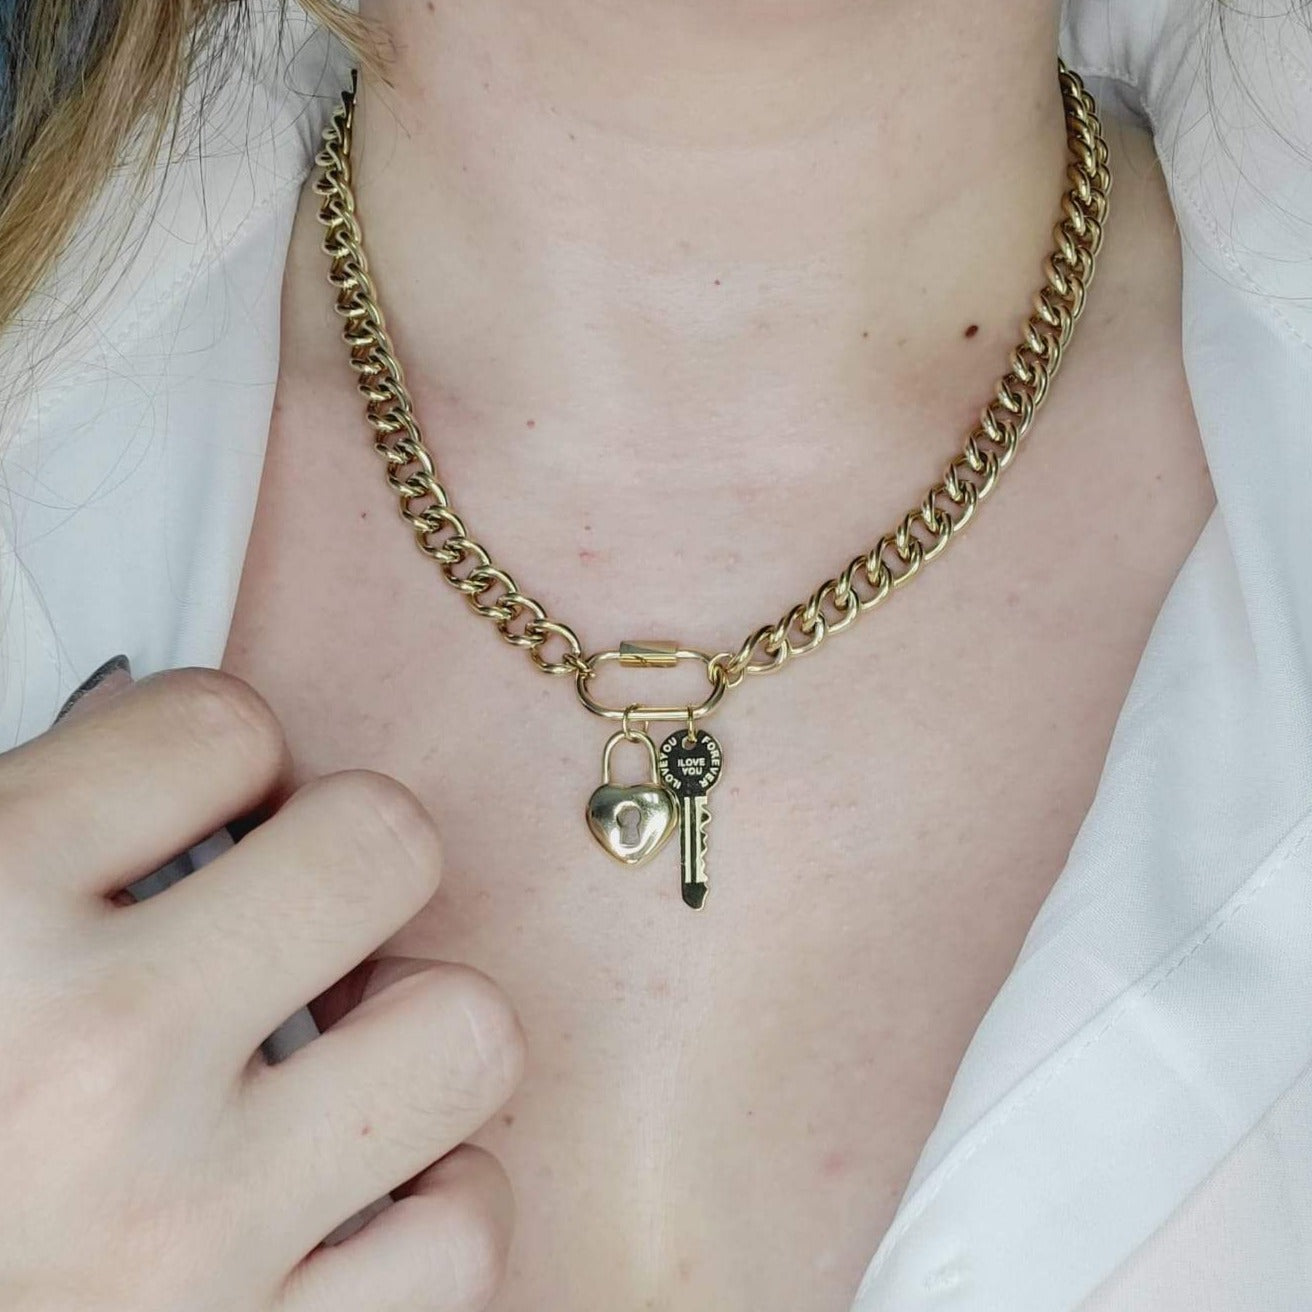 11 of our favorite chunky gold necklaces of 2021